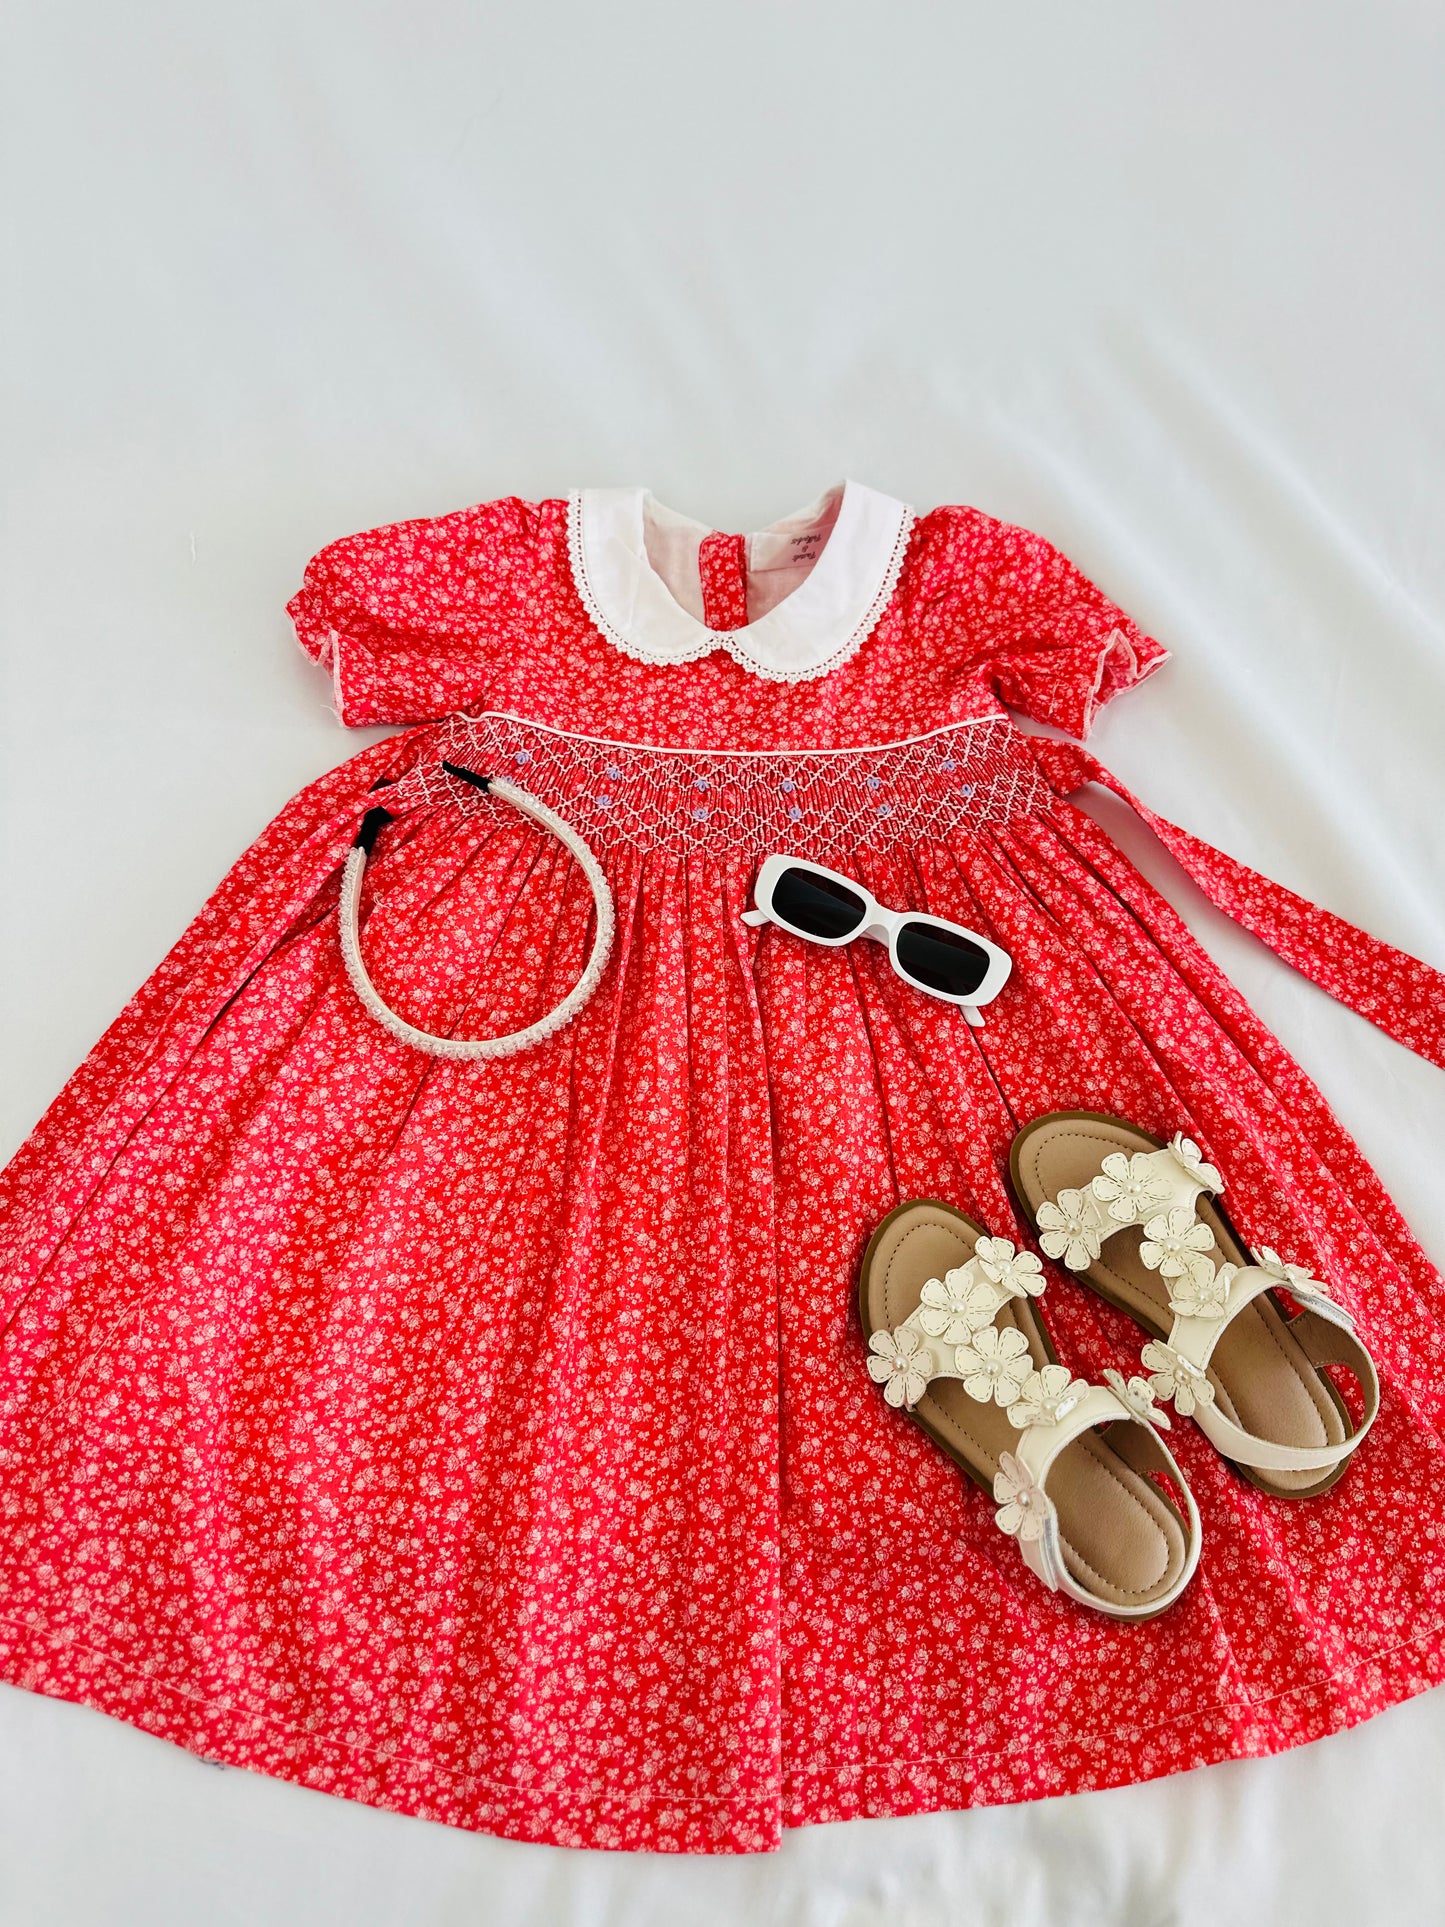 Cutest hand smocked floral dress